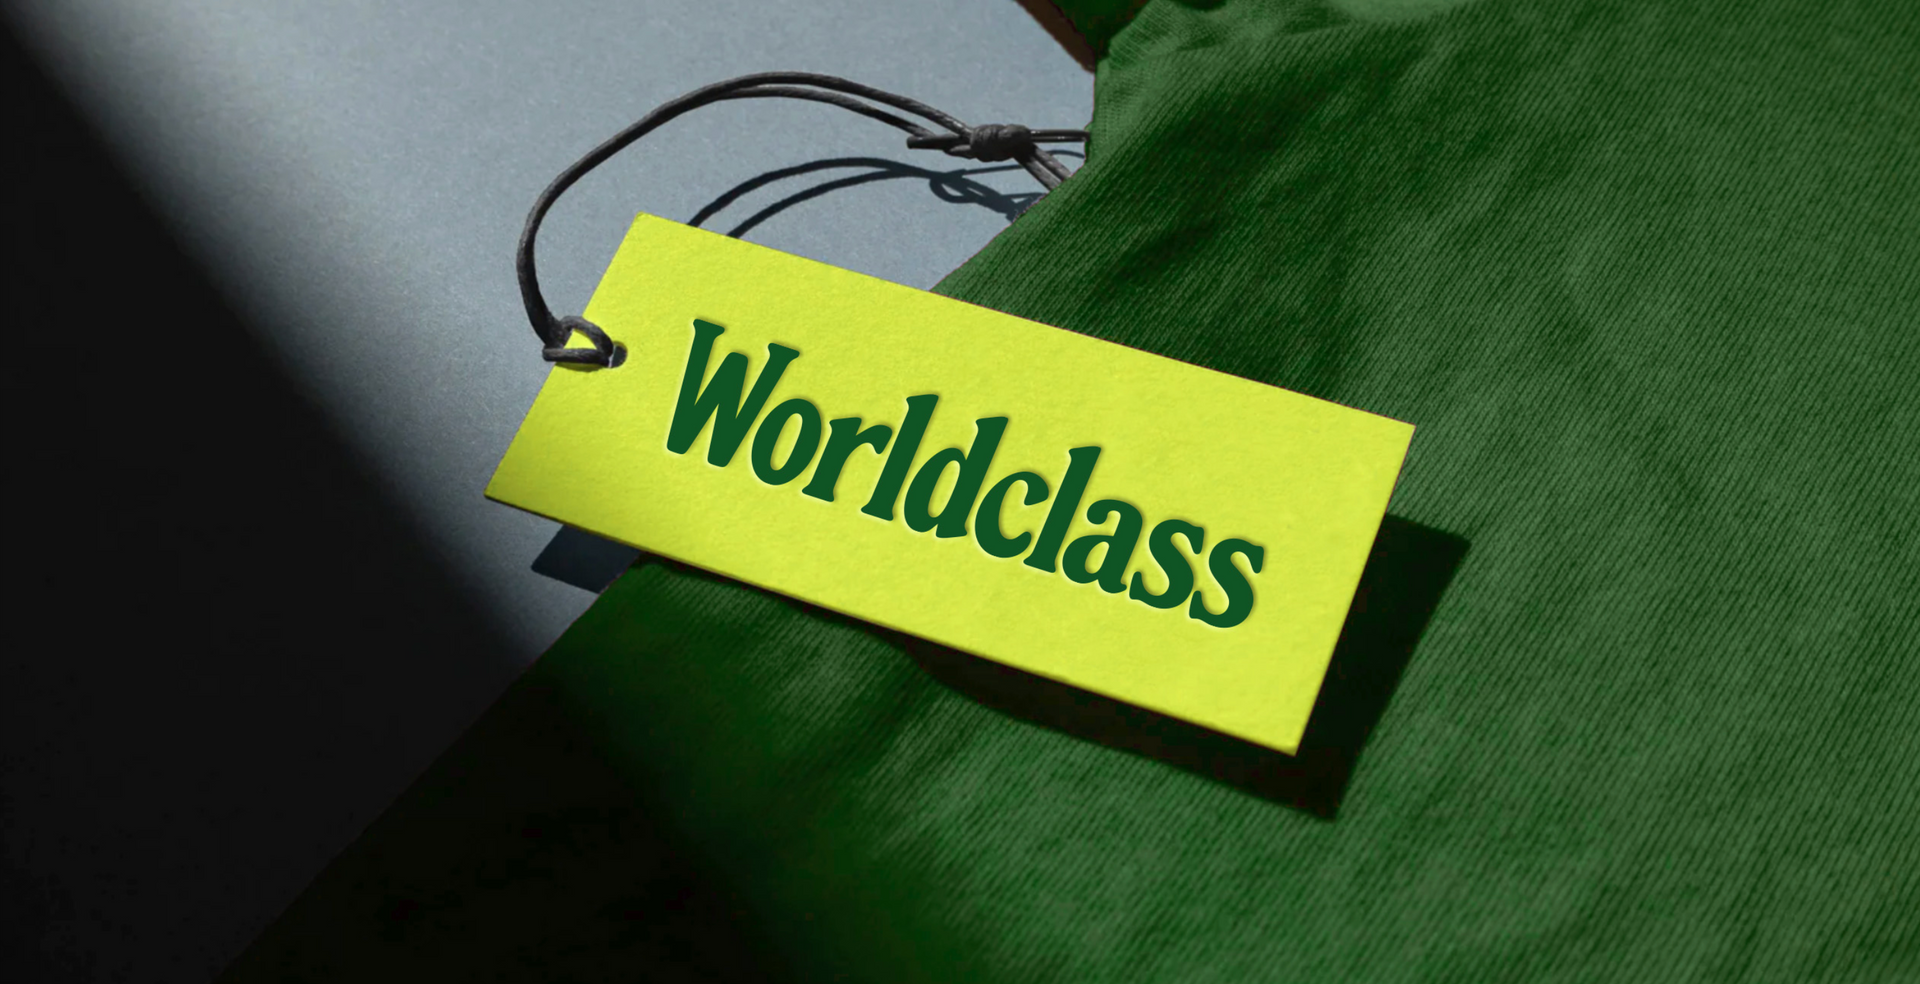 a yellow tag that says worldclass on it